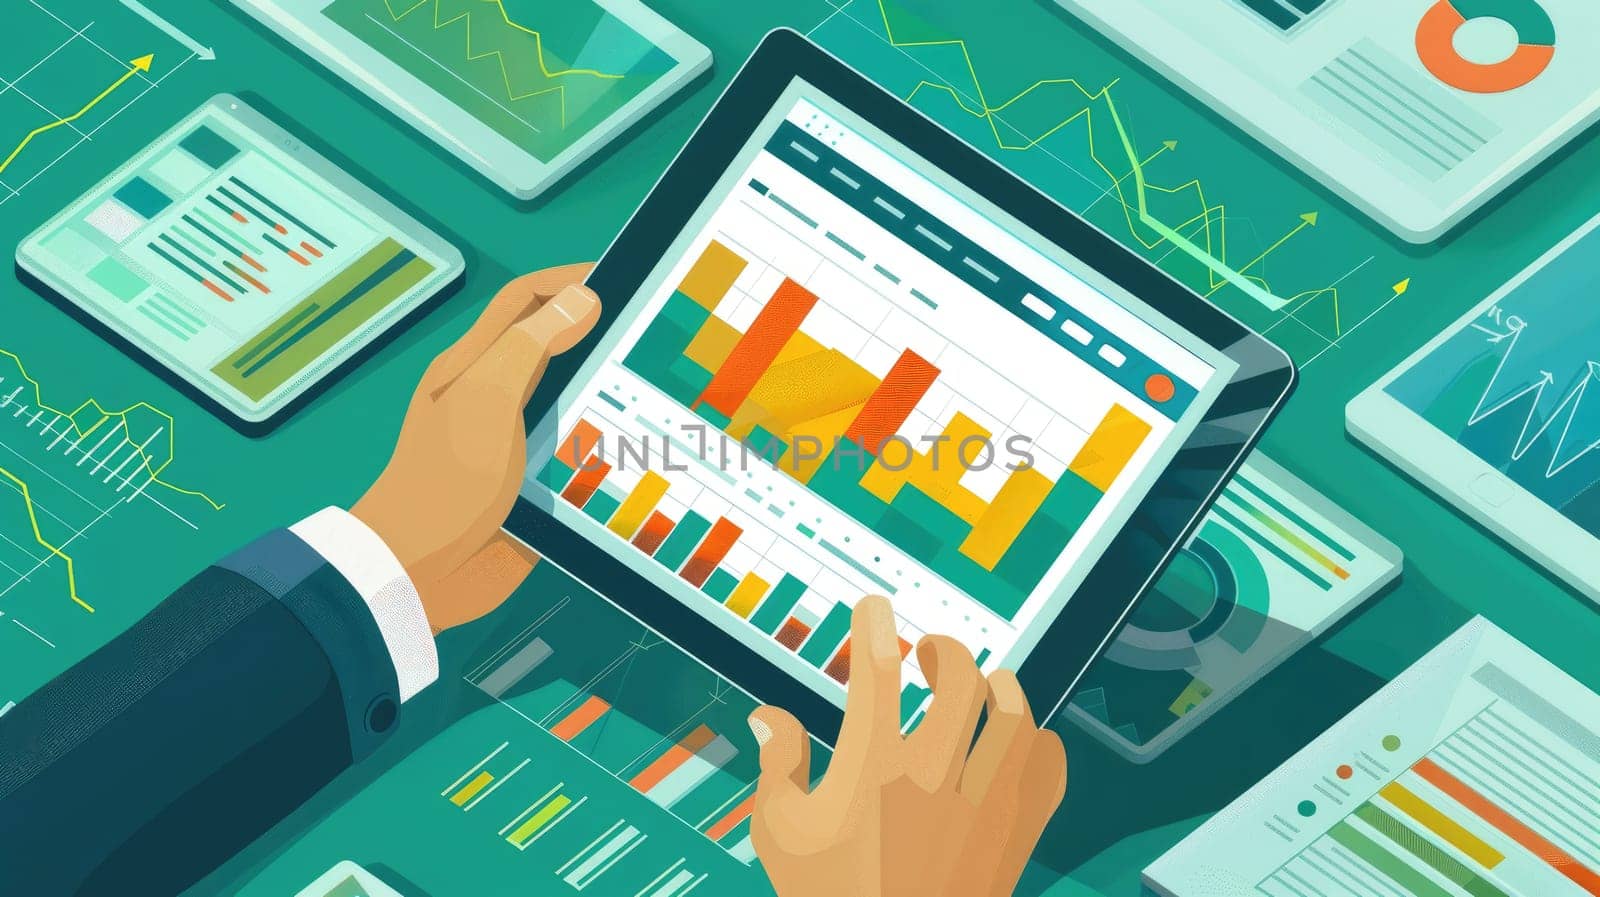 Modern Business Growth and Investment Success - Isometric Illustration of Businessman Analyzing Financial Graphs on Digital Tablet with Copy Space for Decoration..